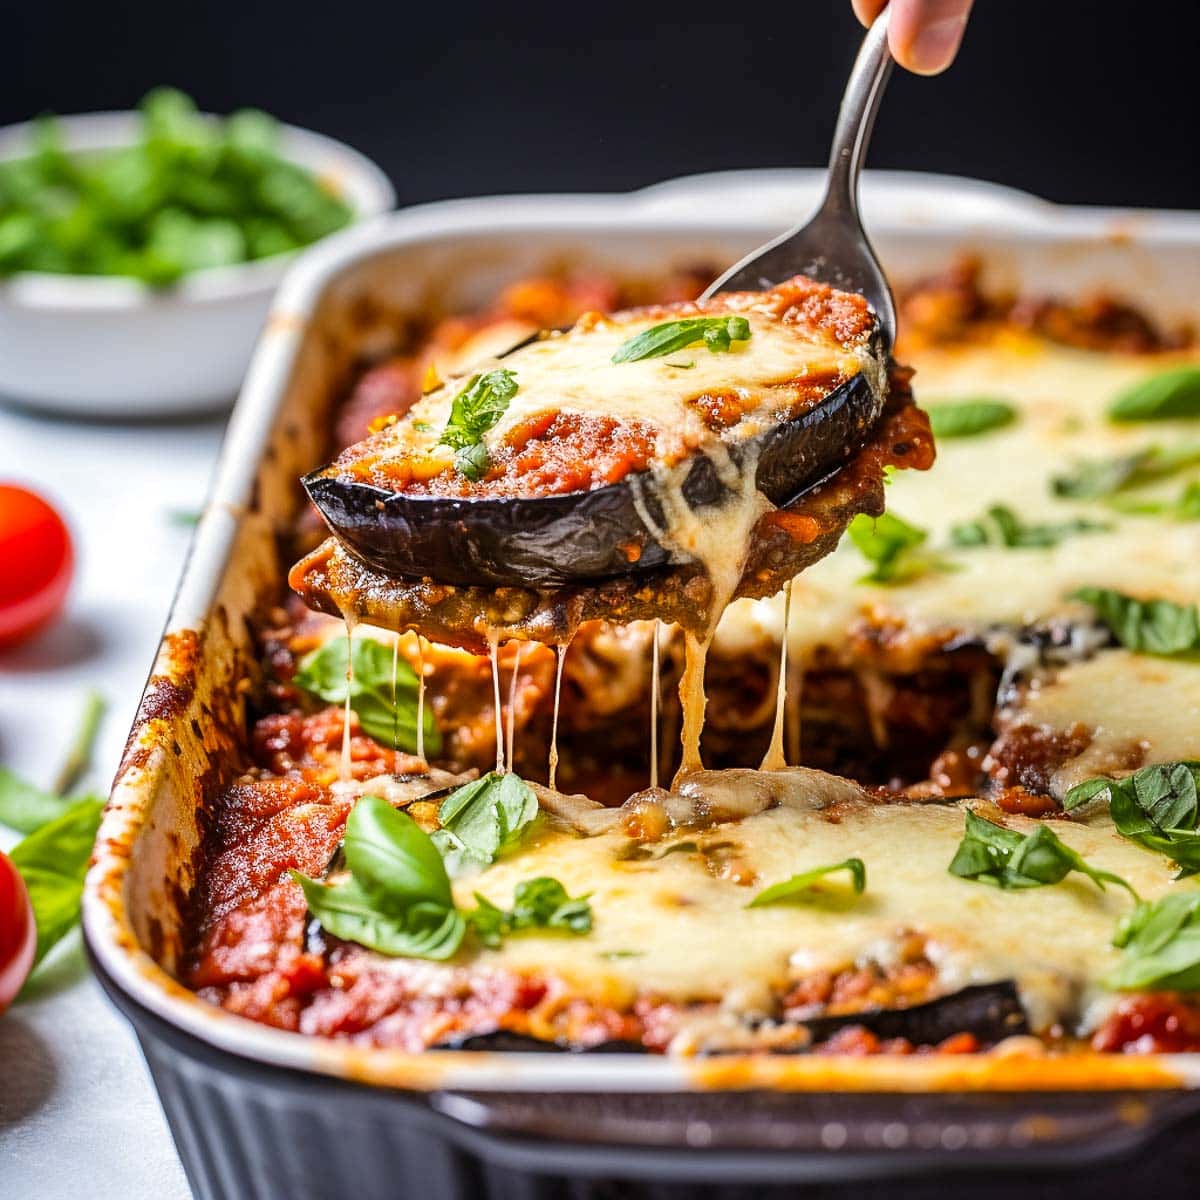 Eggplant Parmesan + 25 Favorite Eggplant recipes the whole family will love-from Eggplant Parmesan, to Moussaka, to Baba Ganoush and everything in between, you'll find inspiration here! 